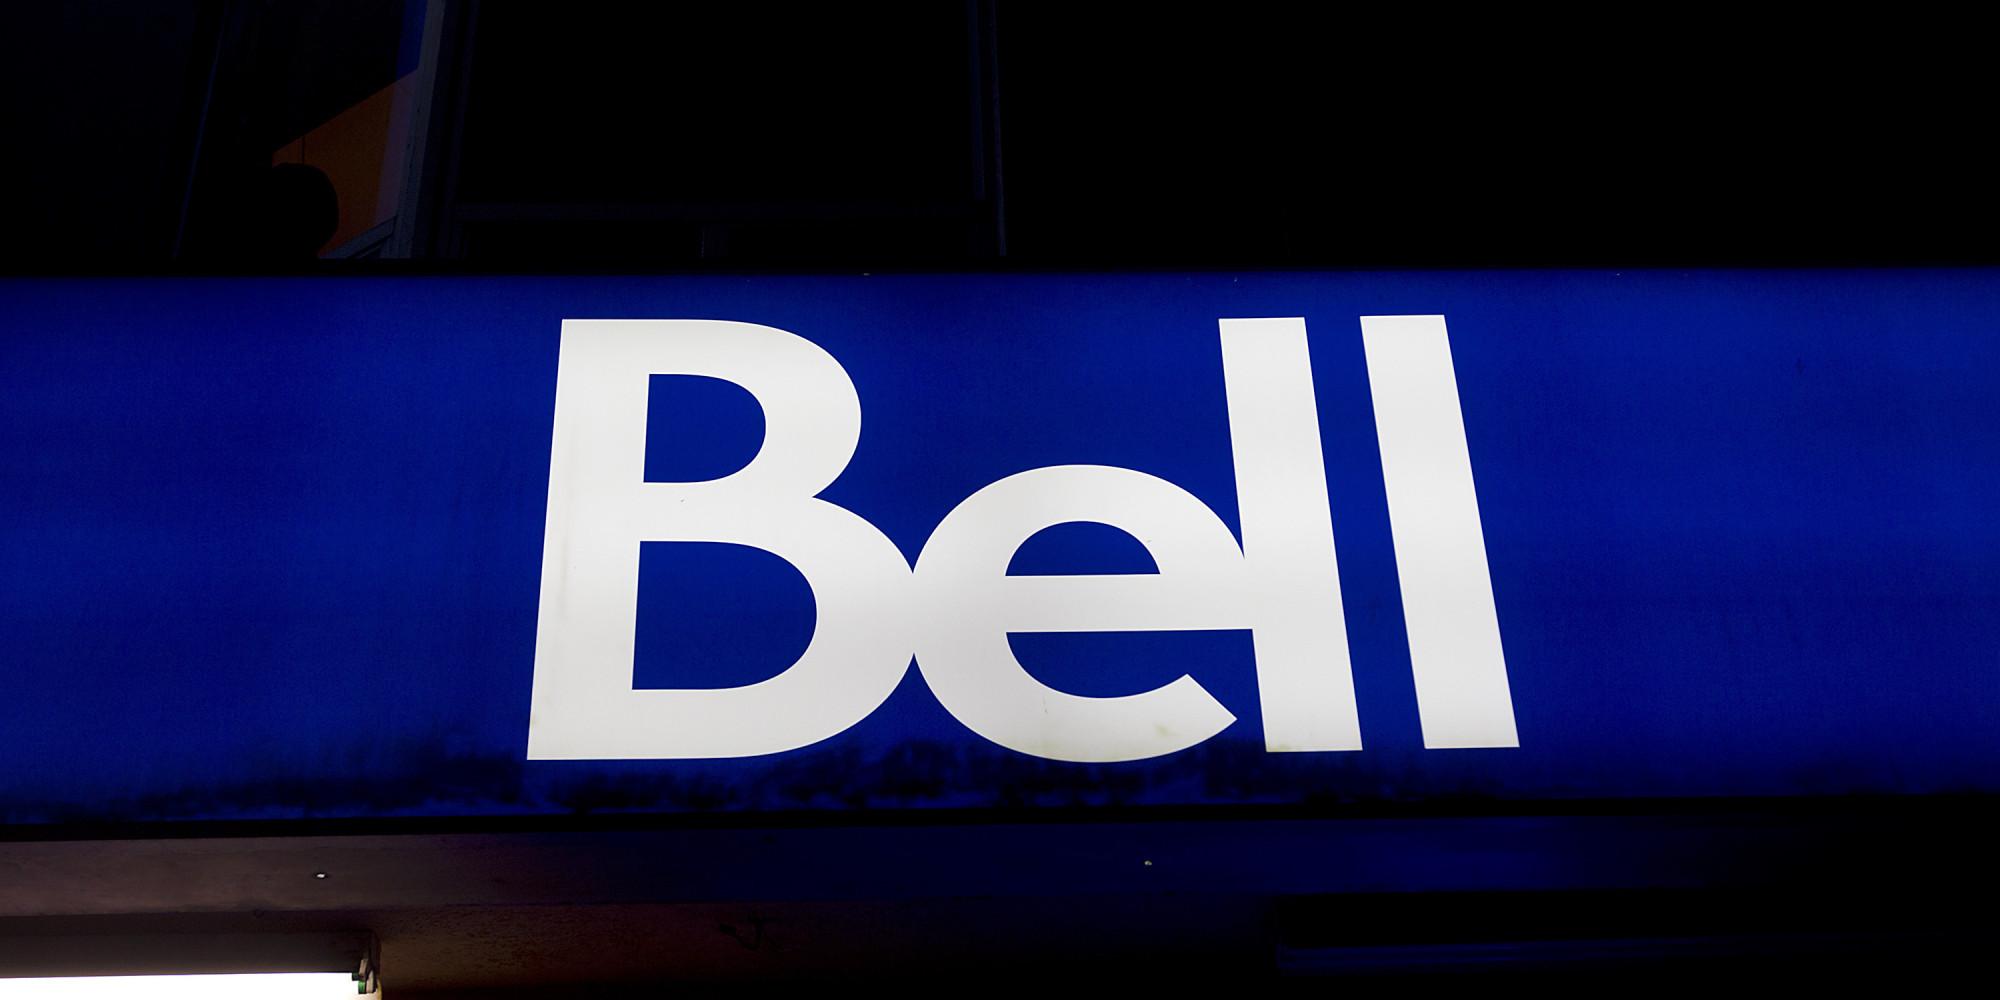 bell-internet-access-must-be-provided-to-smaller-rivals-feds-rule